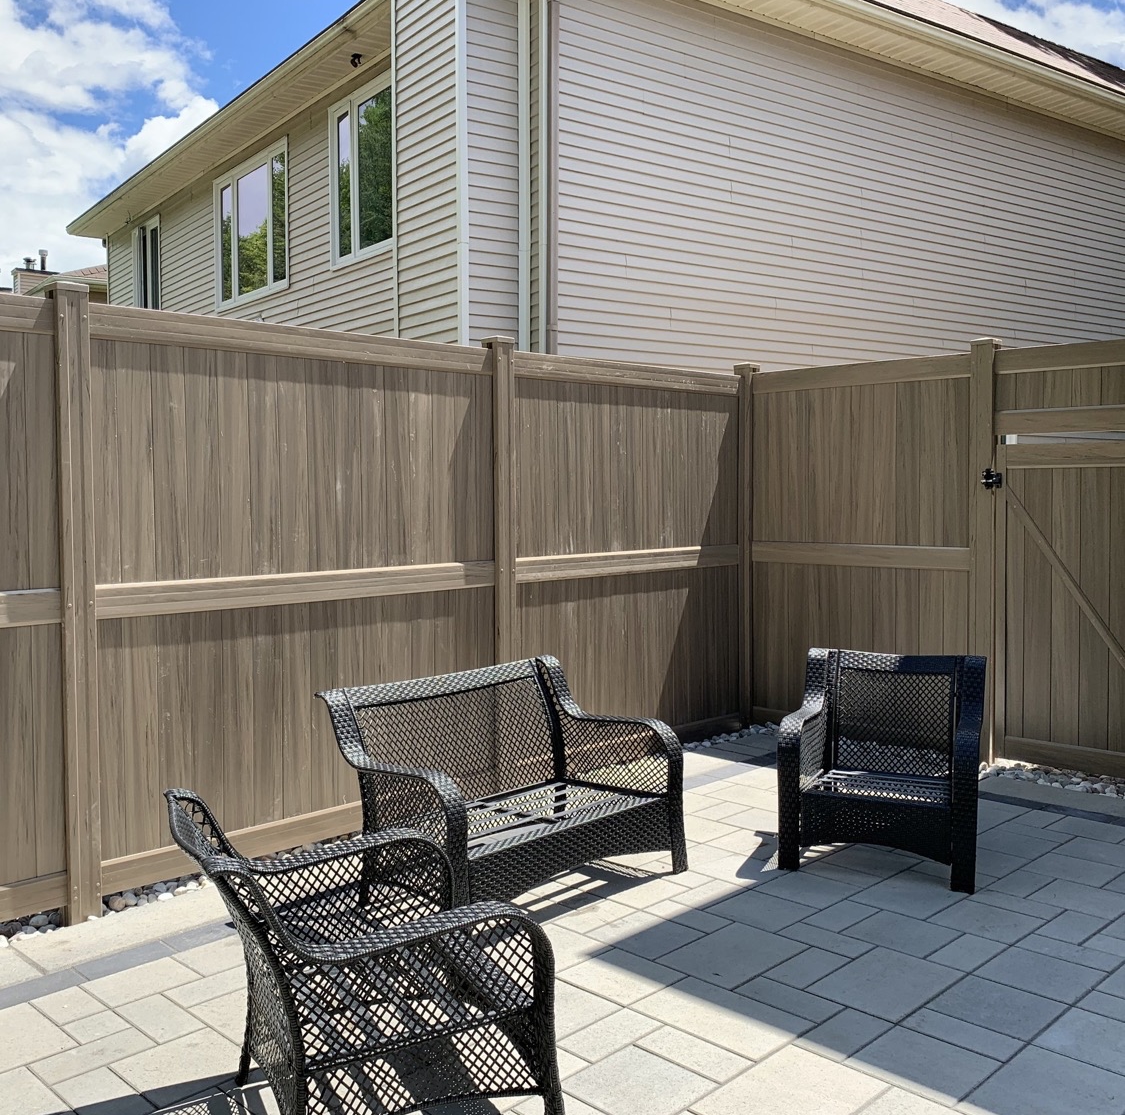 Fence with patio furniture